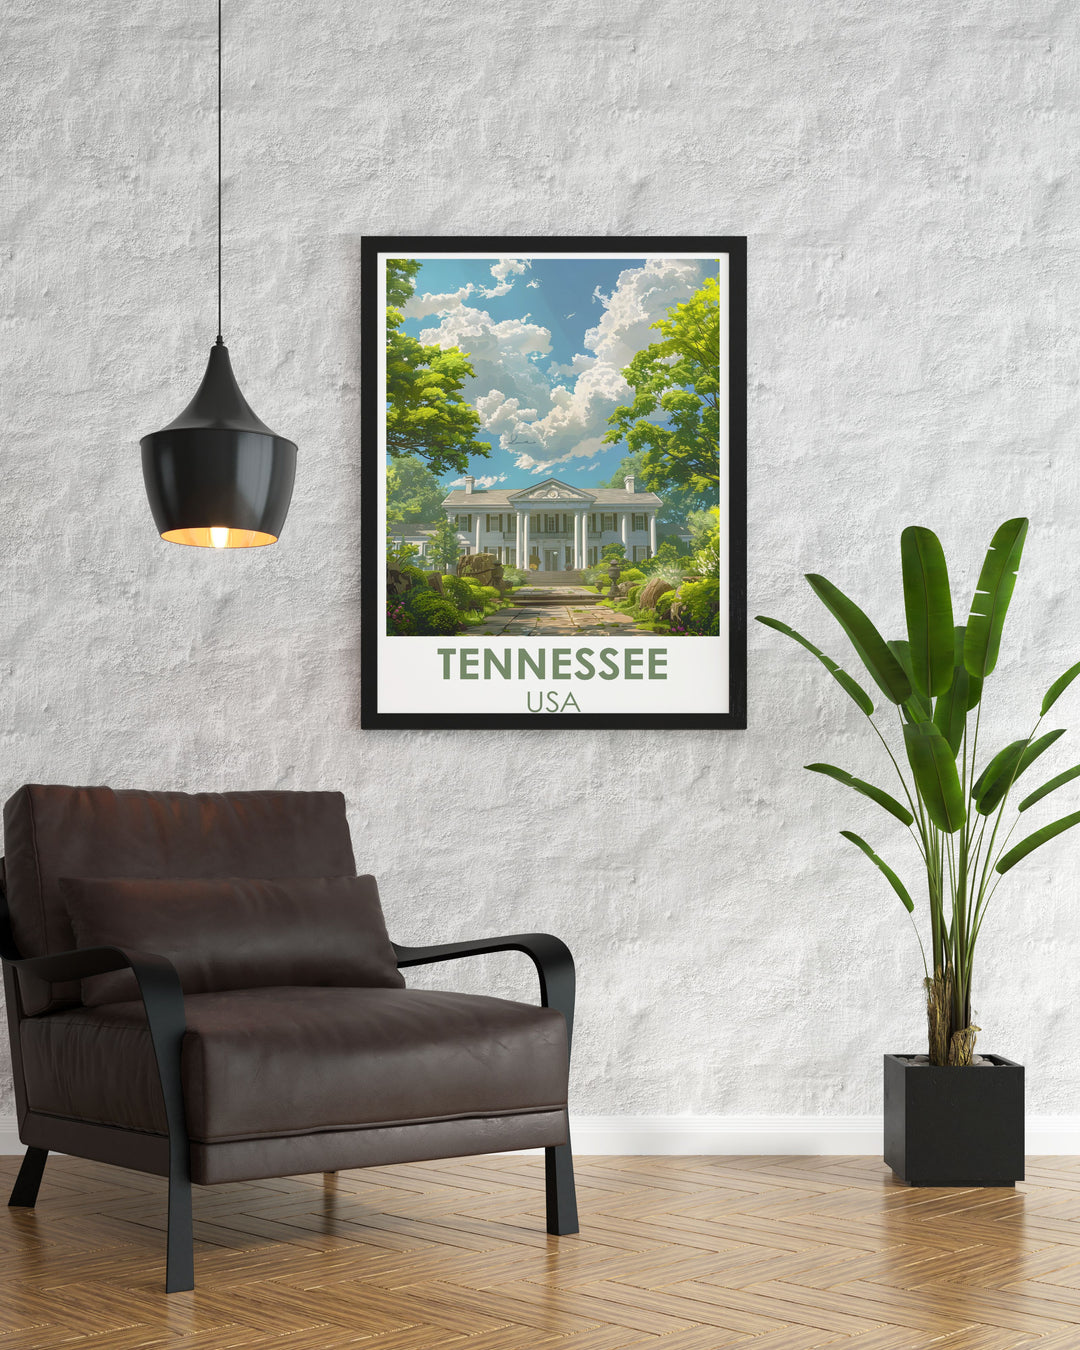 Nashville Tennessee Country Music Poster highlighting the legendary Ryman Auditorium and Grand Ole Opry. This USA Travel Poster showcases the essence of Music City making it an ideal gift for country music lovers and fans of Graceland Digital artwork and vintage prints.